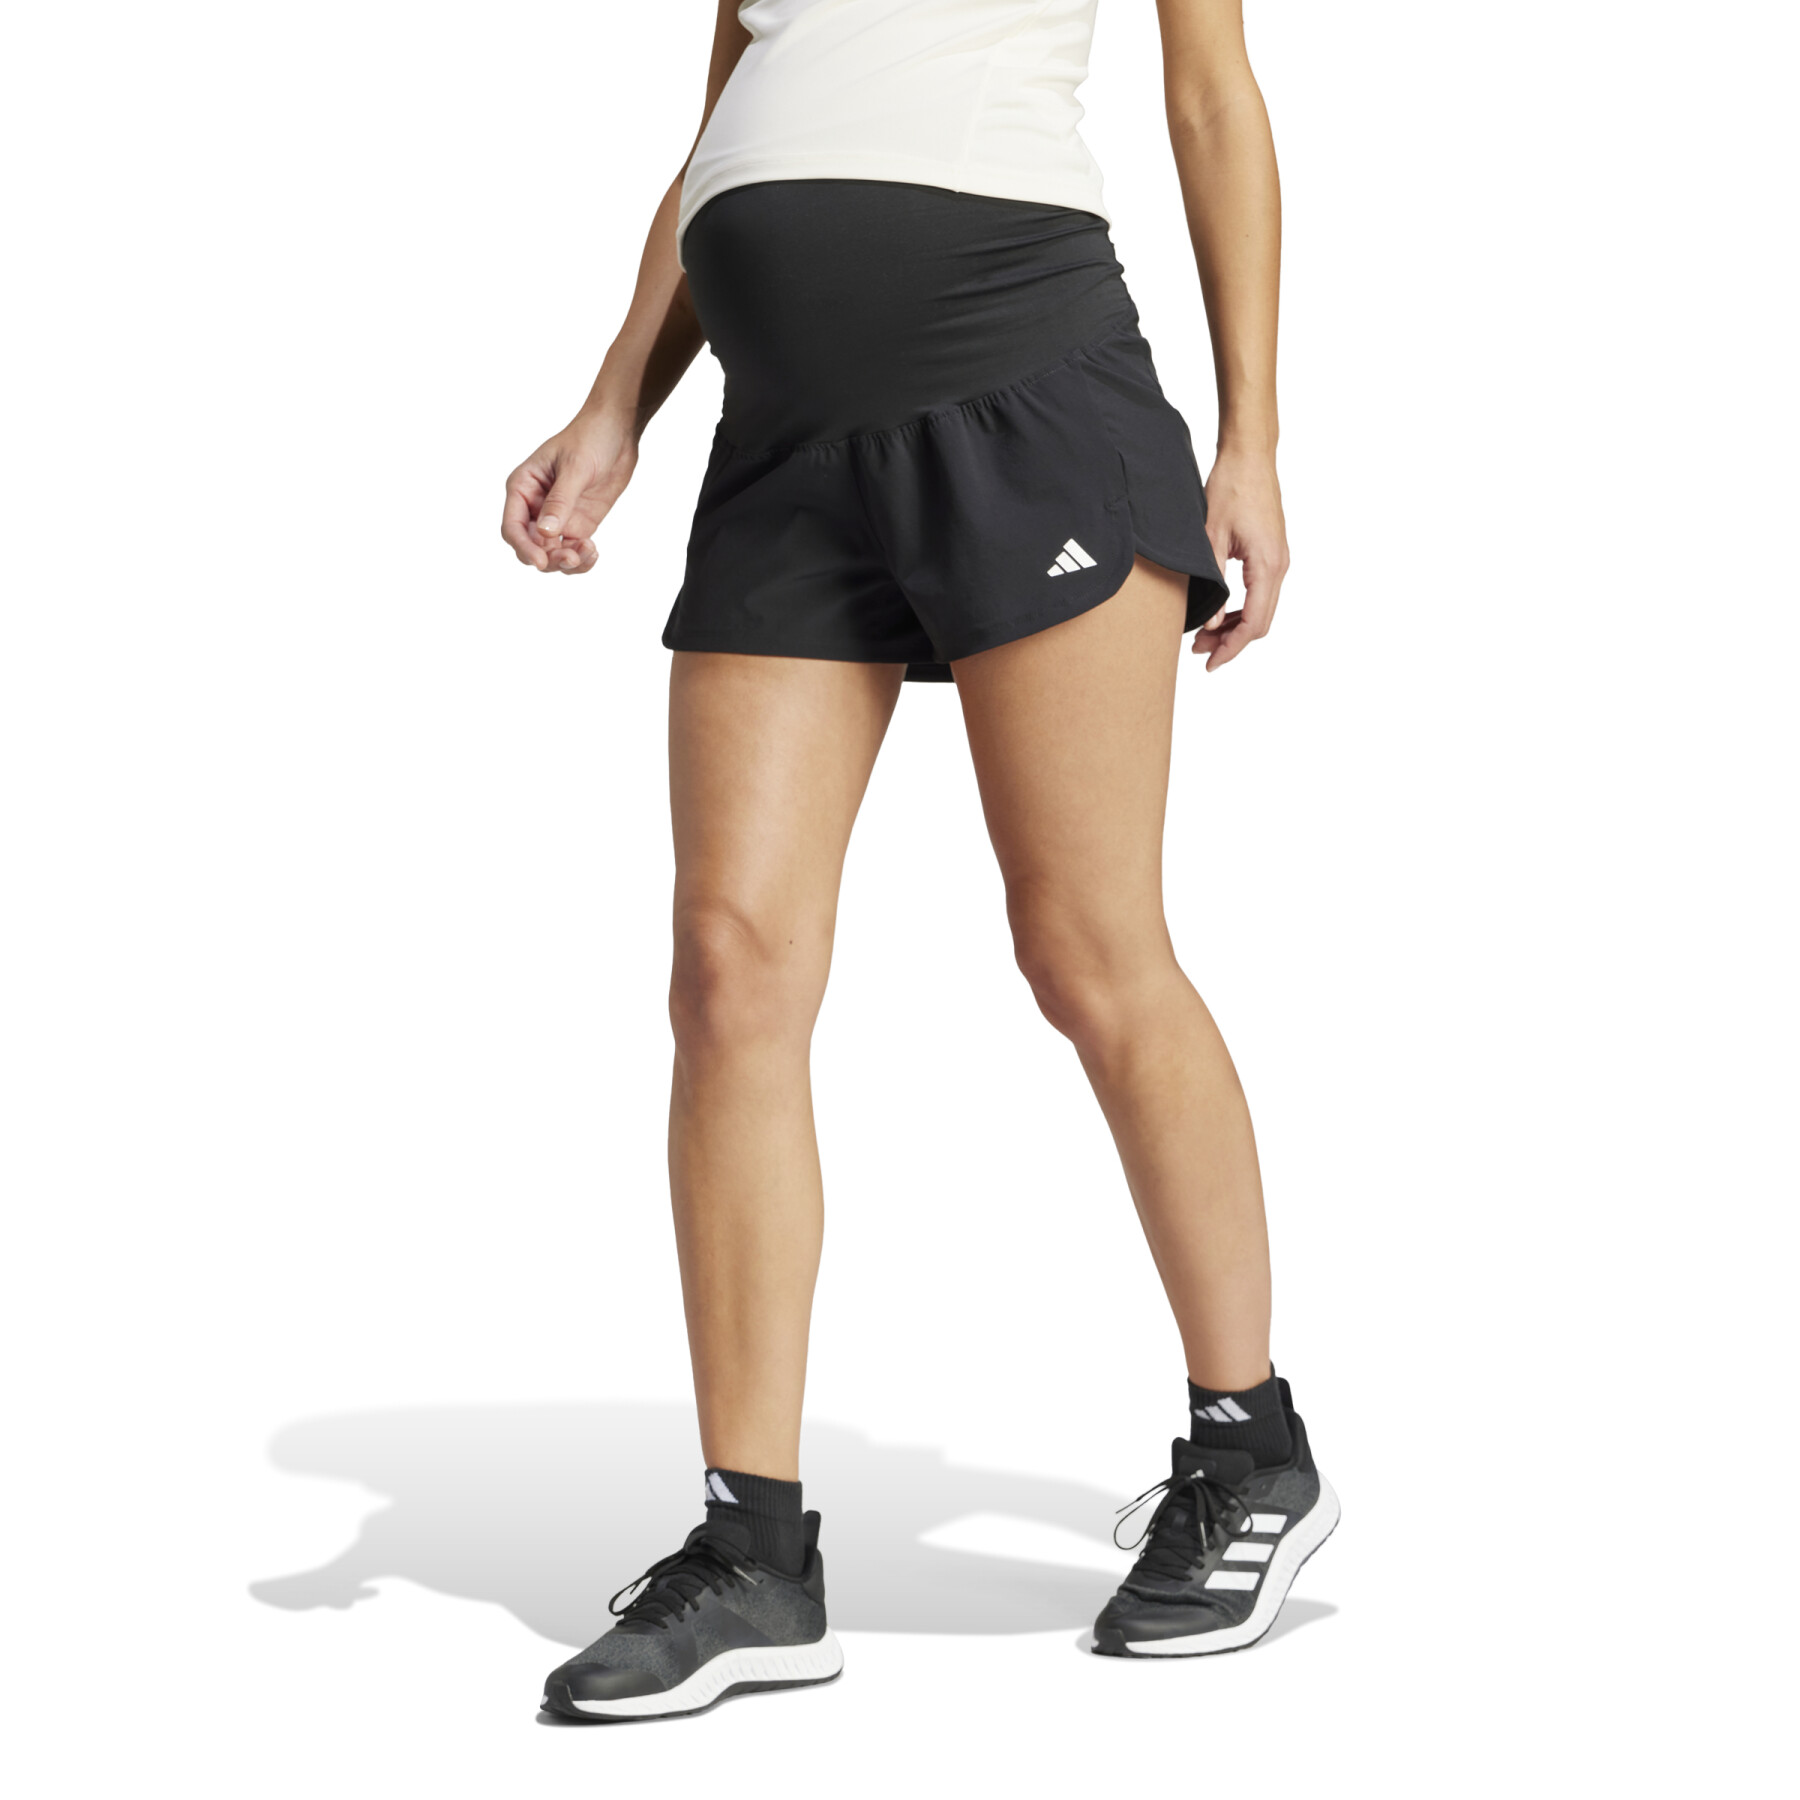 Women's woven stretch shorts adidas Pacer Maternity